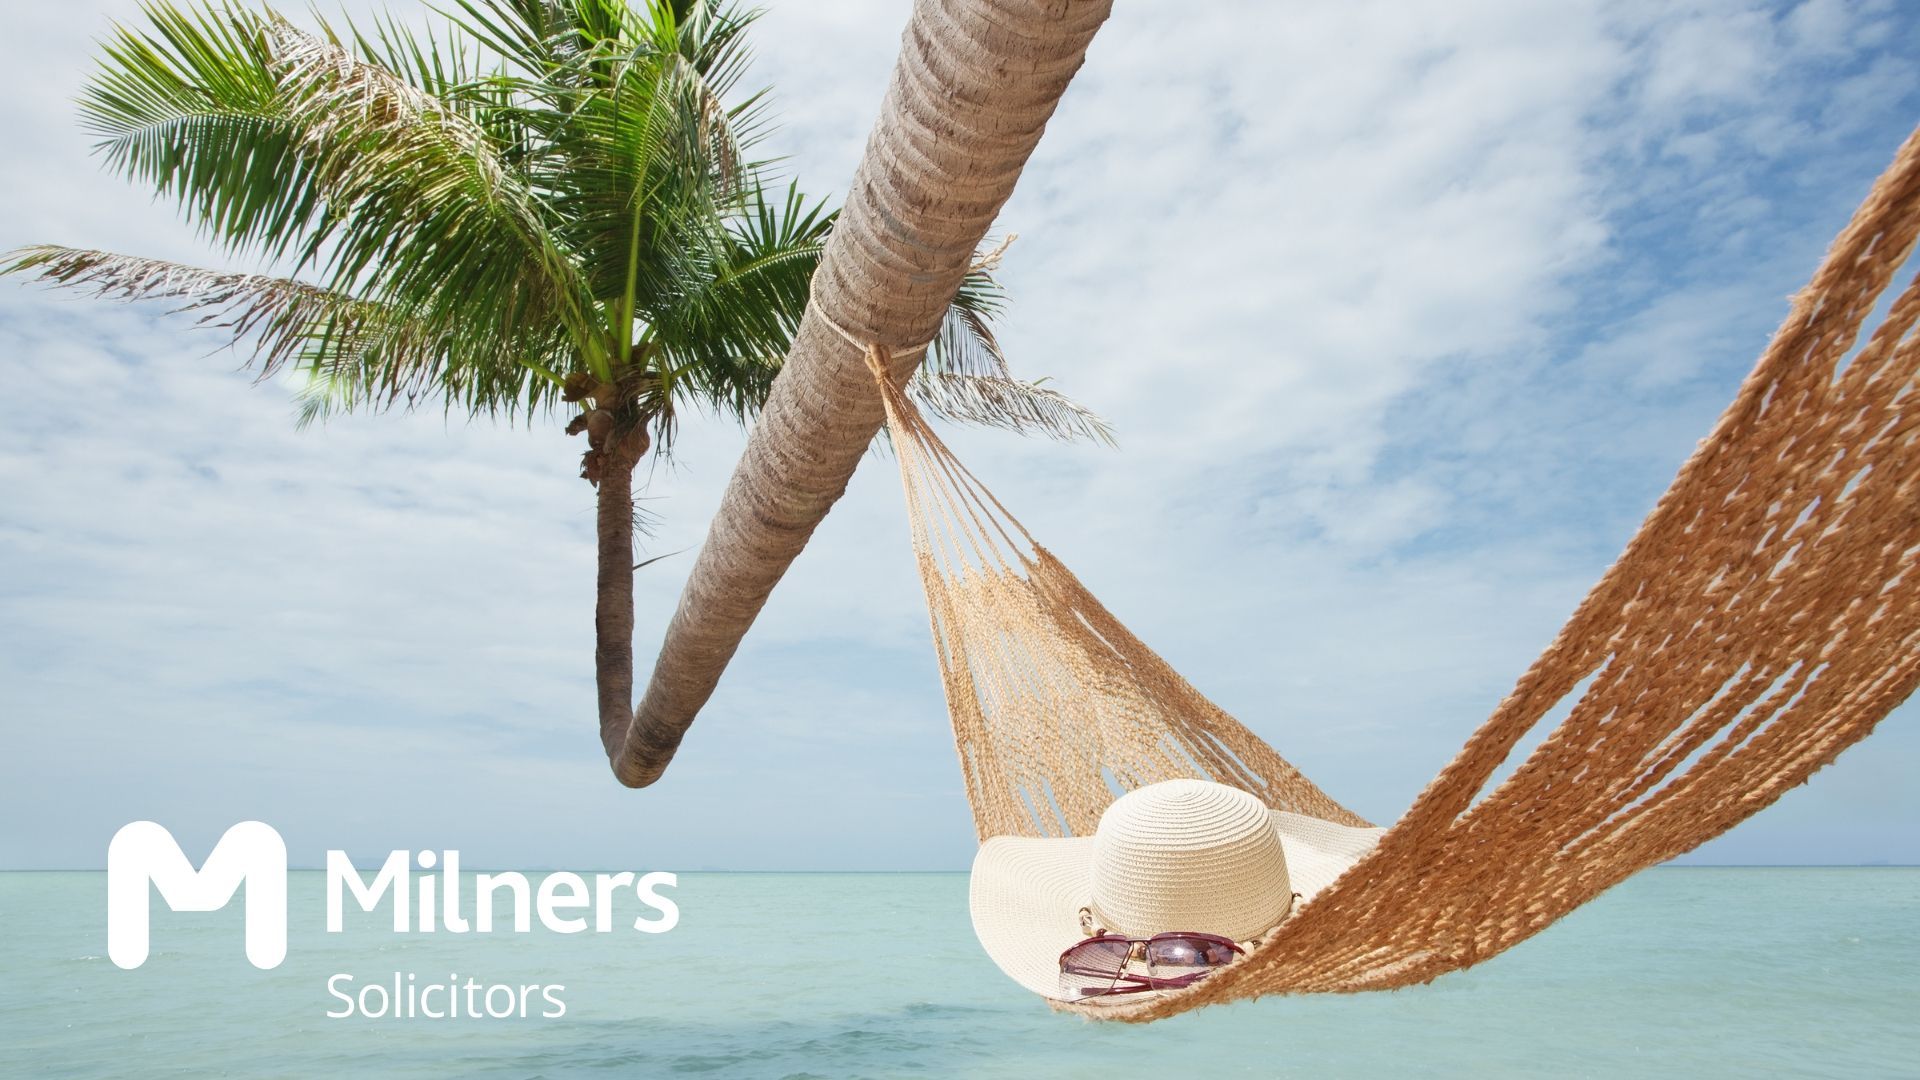 What do employers and employees need to know about the law in relation to holiday requests? Get the answers in our guide.